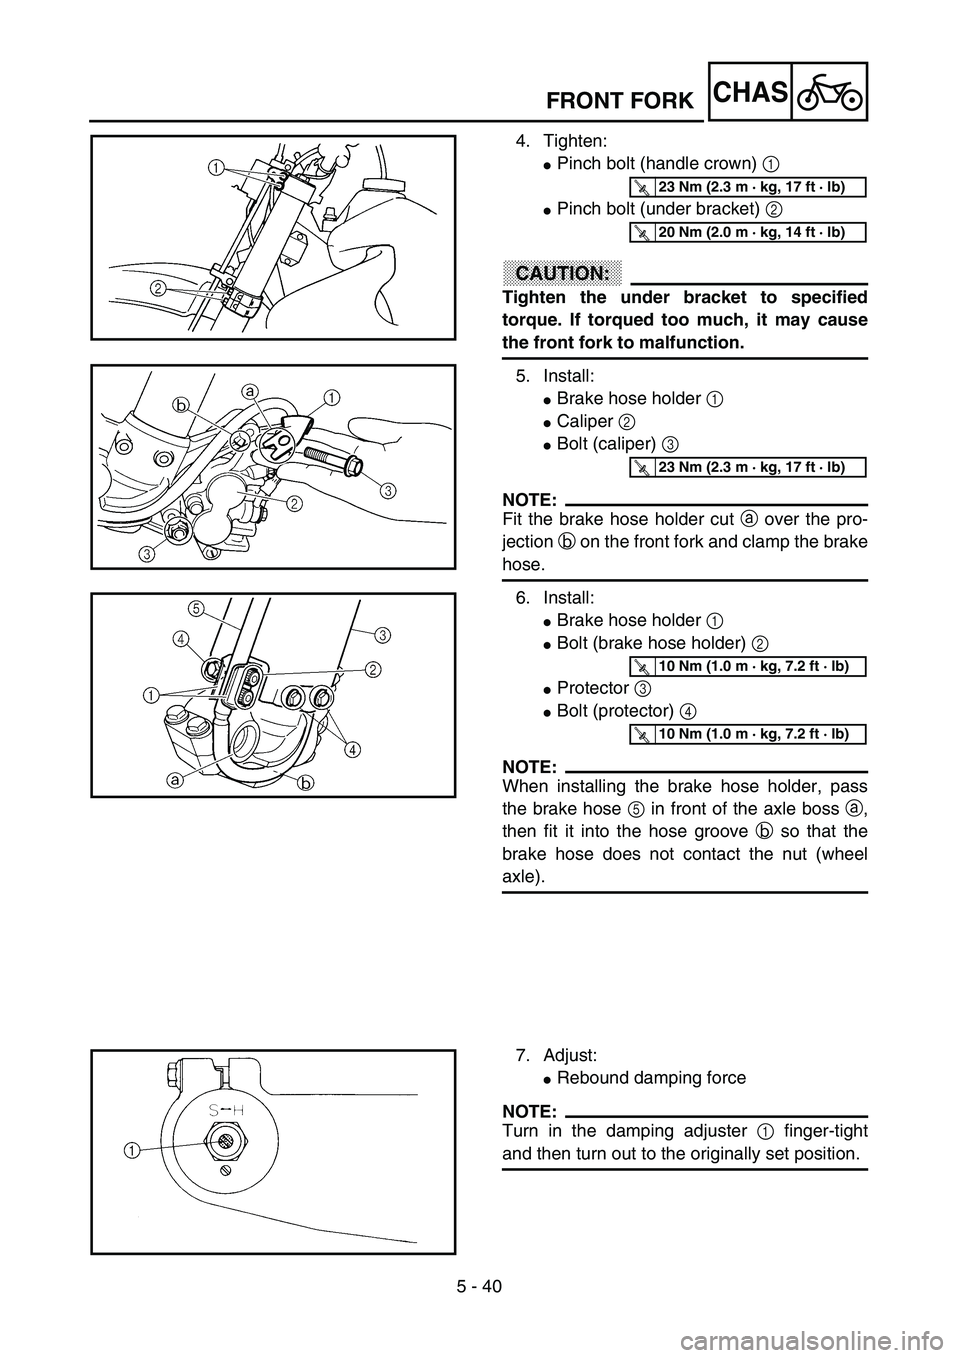 YAMAHA WR 400F 2002  Manuale de Empleo (in Spanish) 5 - 40
CHASFRONT FORK
4. Tighten:
Pinch bolt (handle crown) 1 
Pinch bolt (under bracket) 2 
CAUTION:
Tighten the under bracket to specified
torque. If torqued too much, it may cause
the front fork 